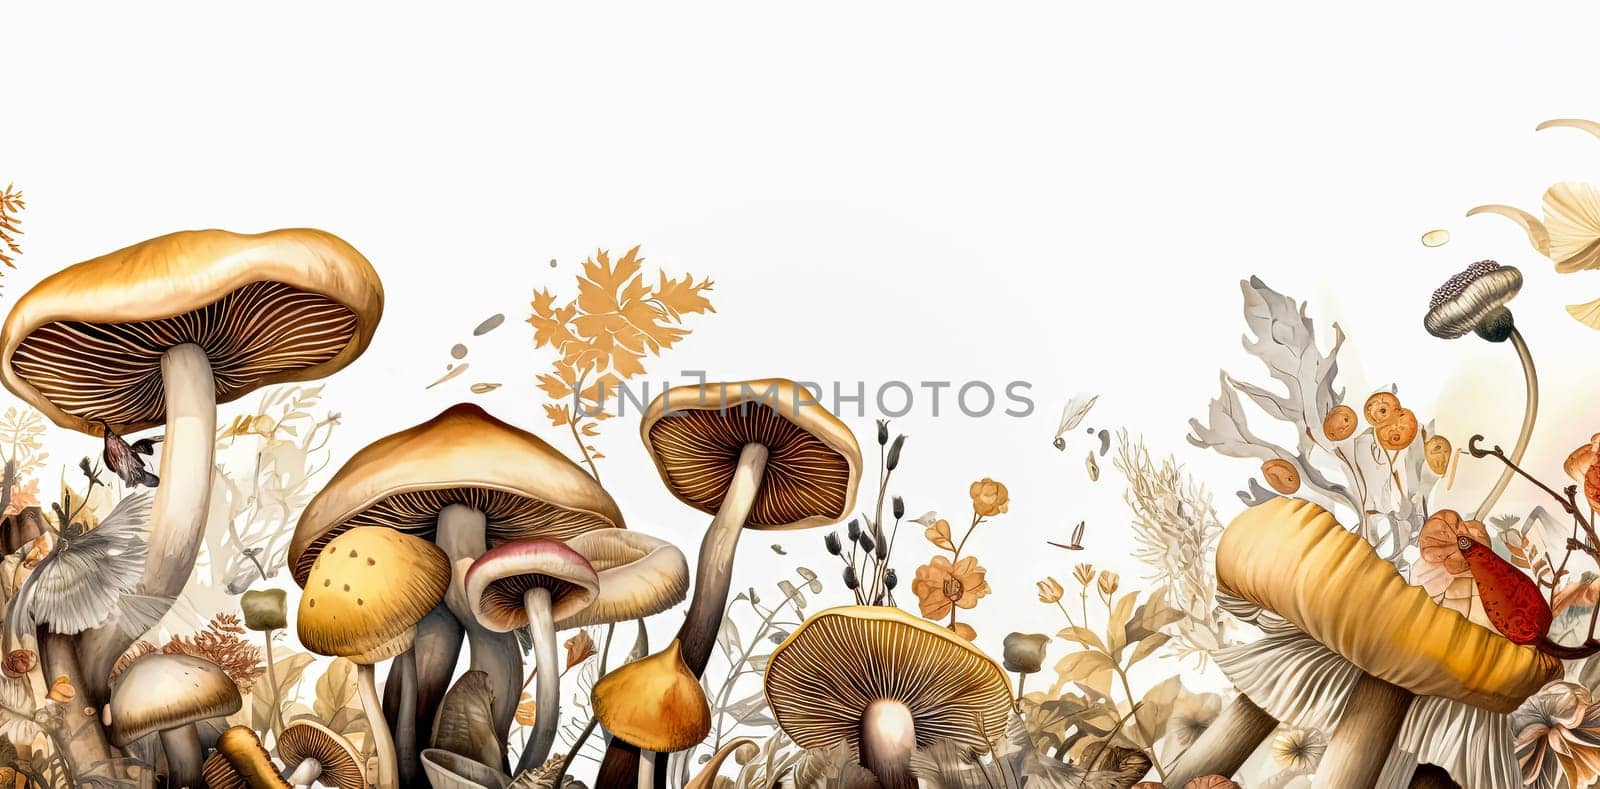 A row of mushrooms are shown in a field of grass. by Alla_Morozova93